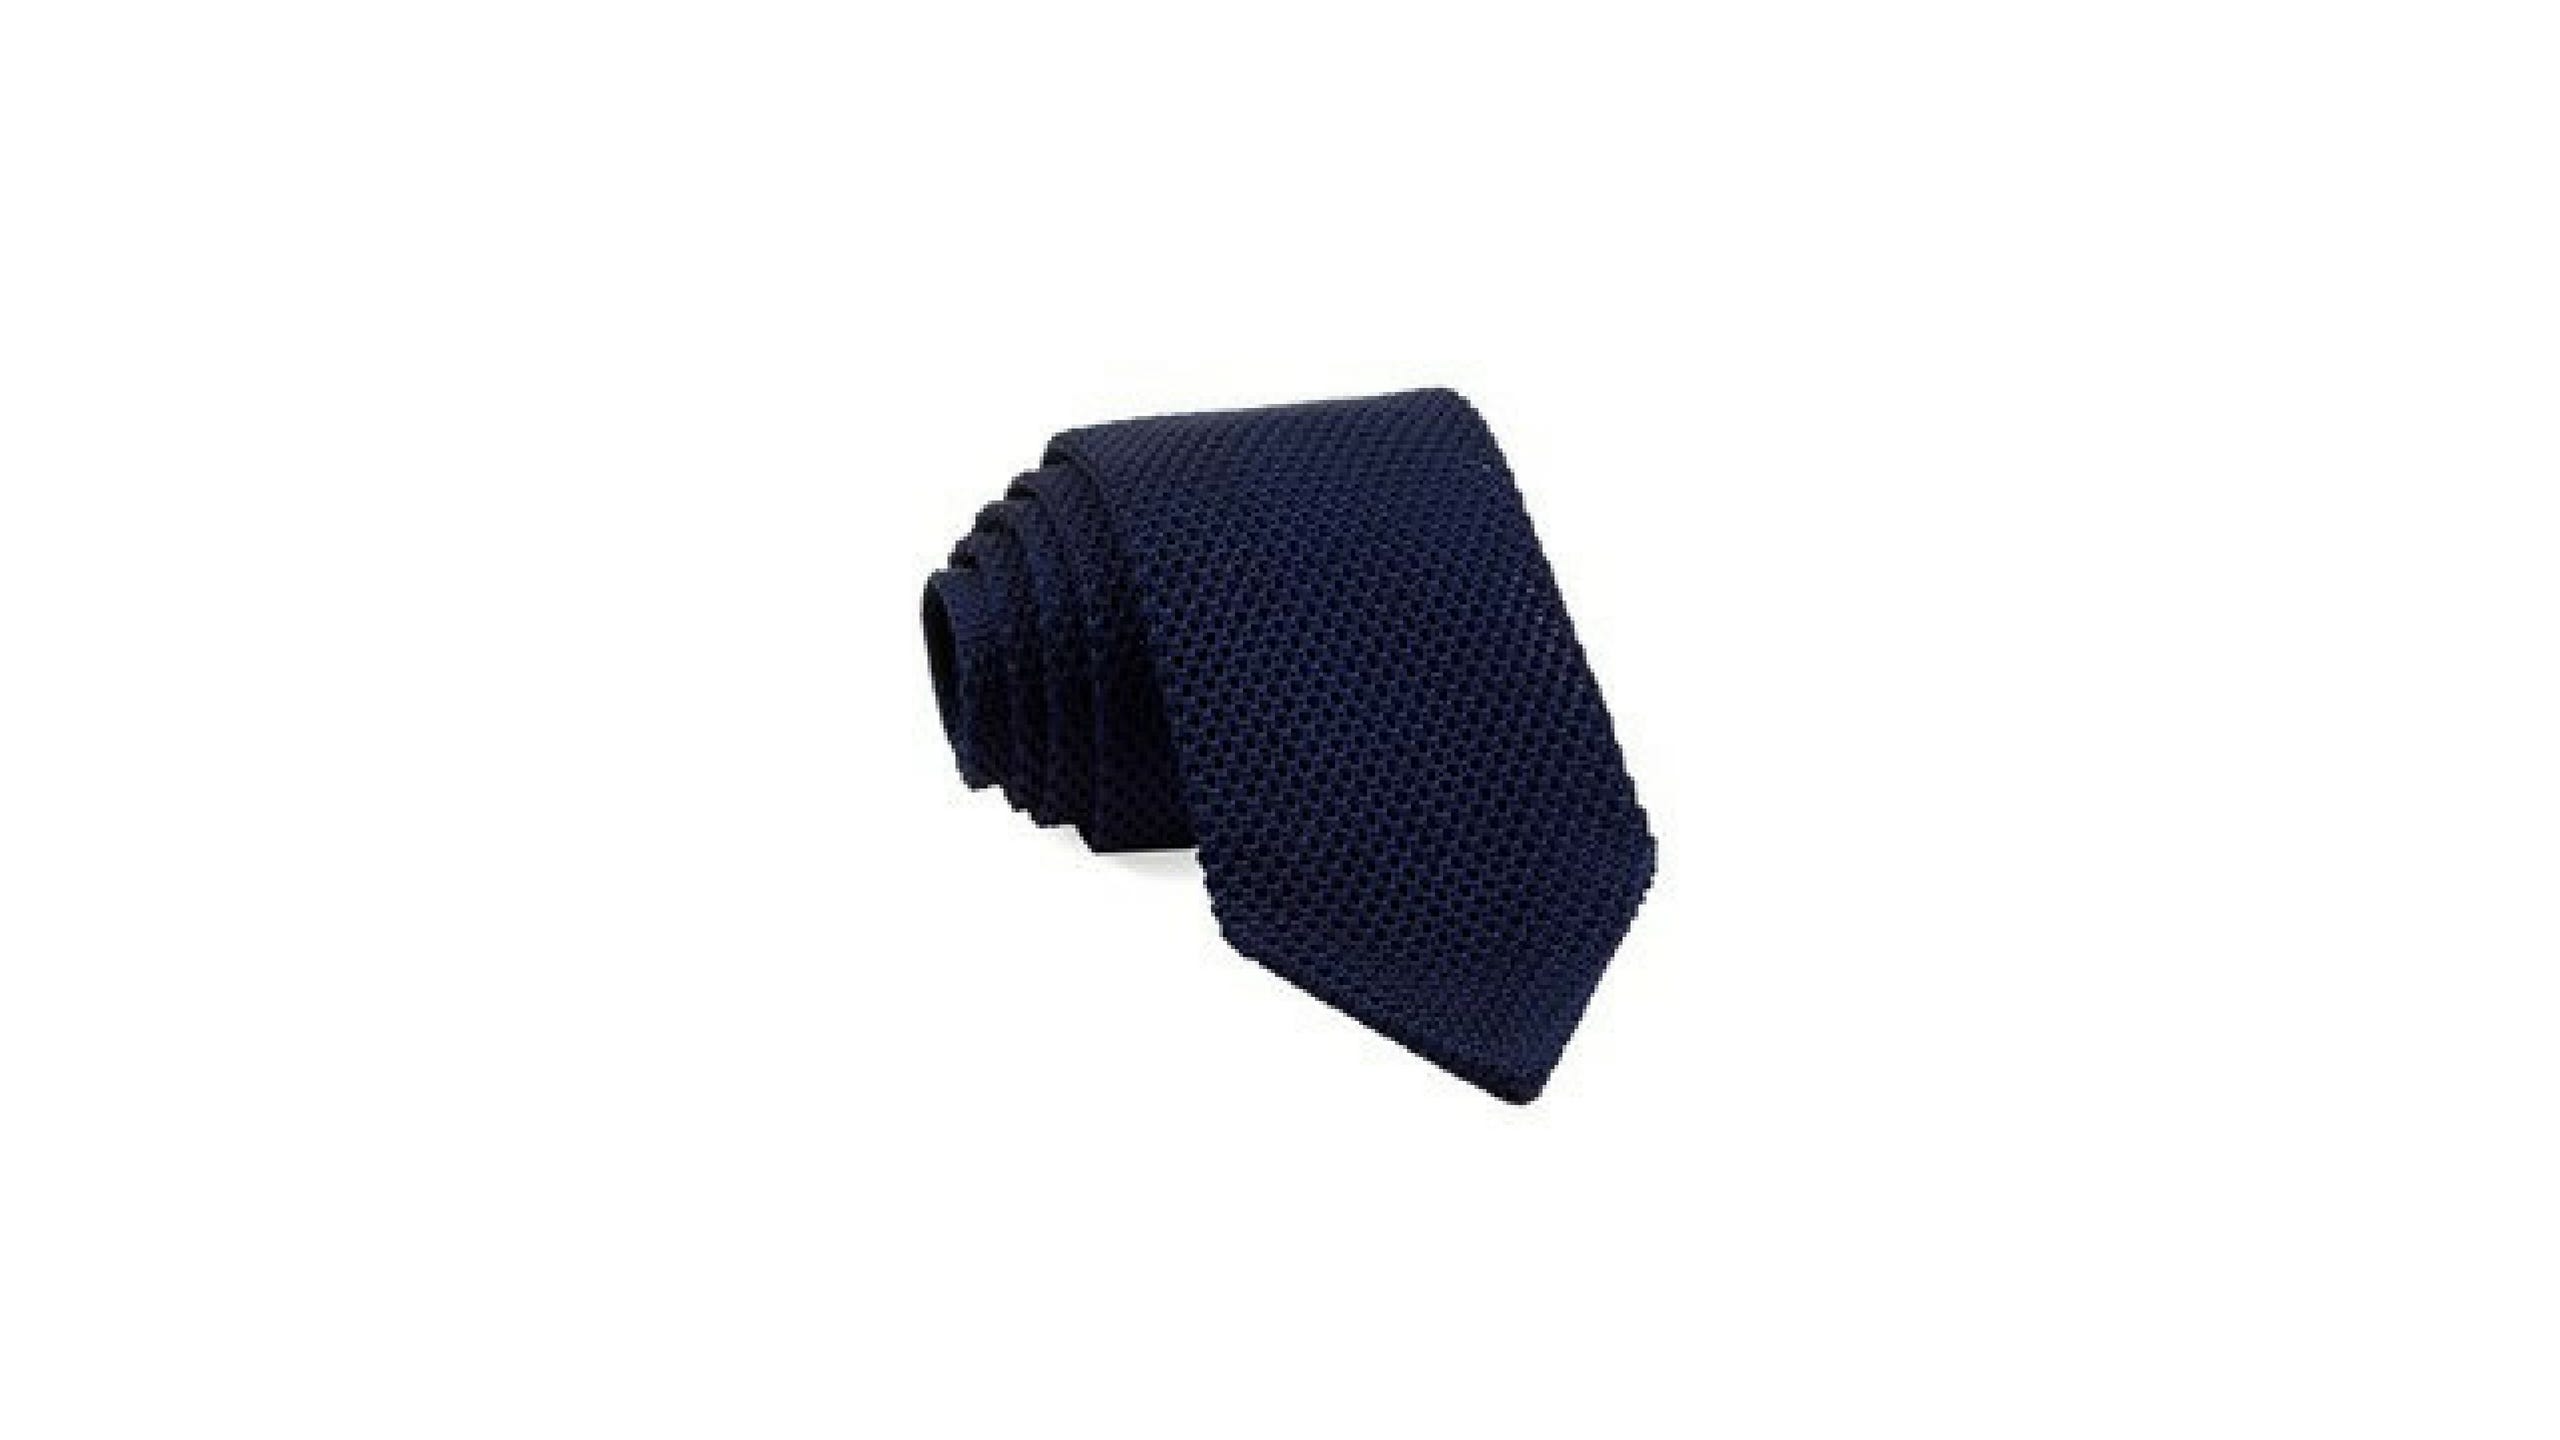 knit tie from the tie bar